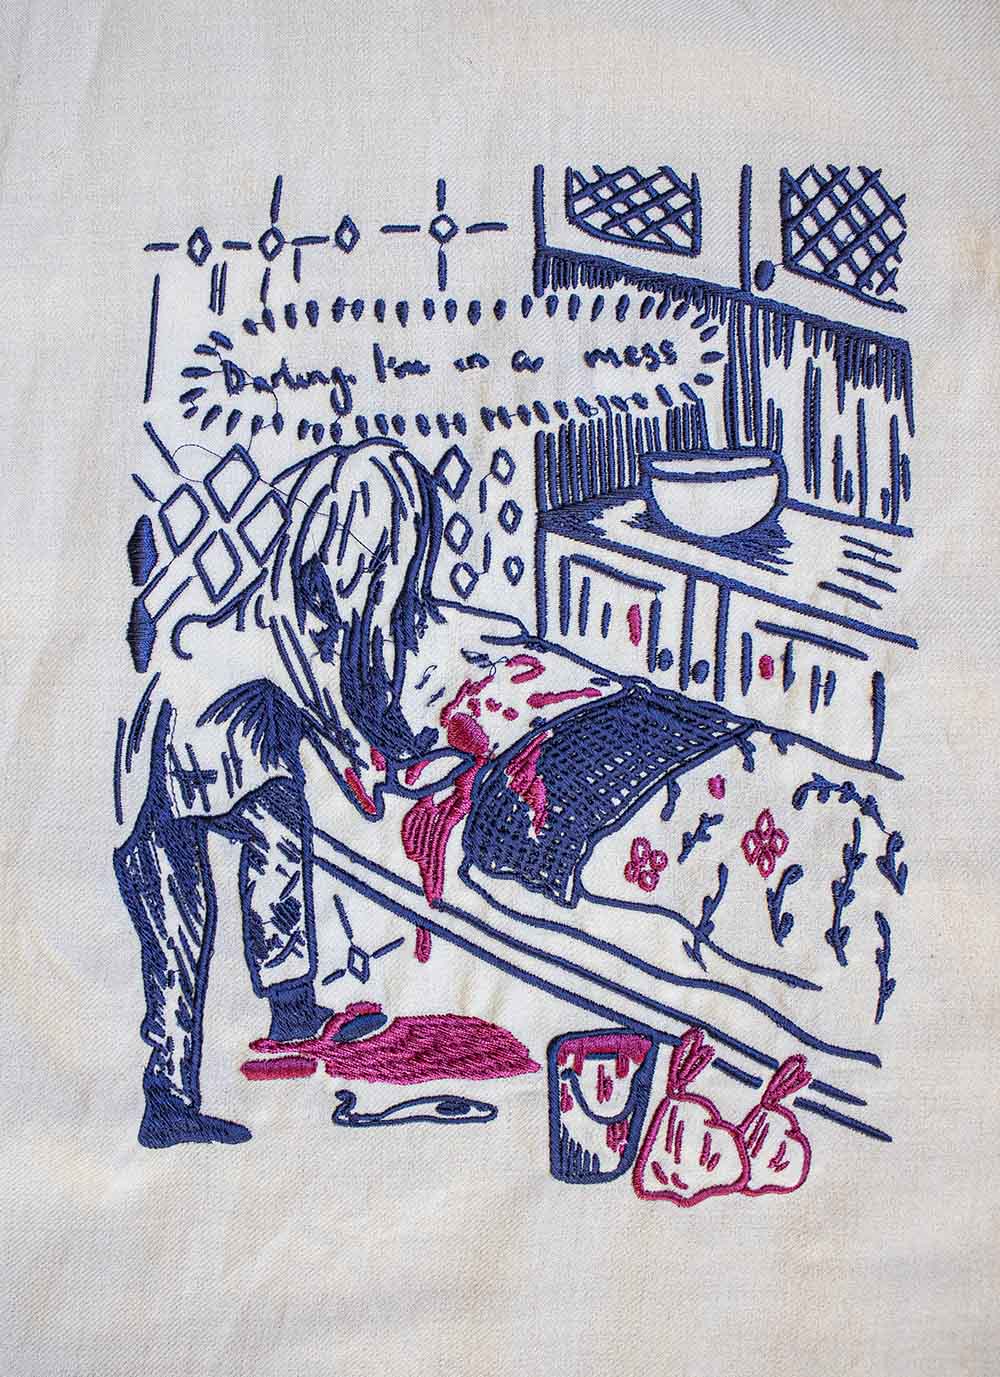 Embroidered image of a child leaning over their parent on a bed covered in blood, saying "darling, i'm in a mess"